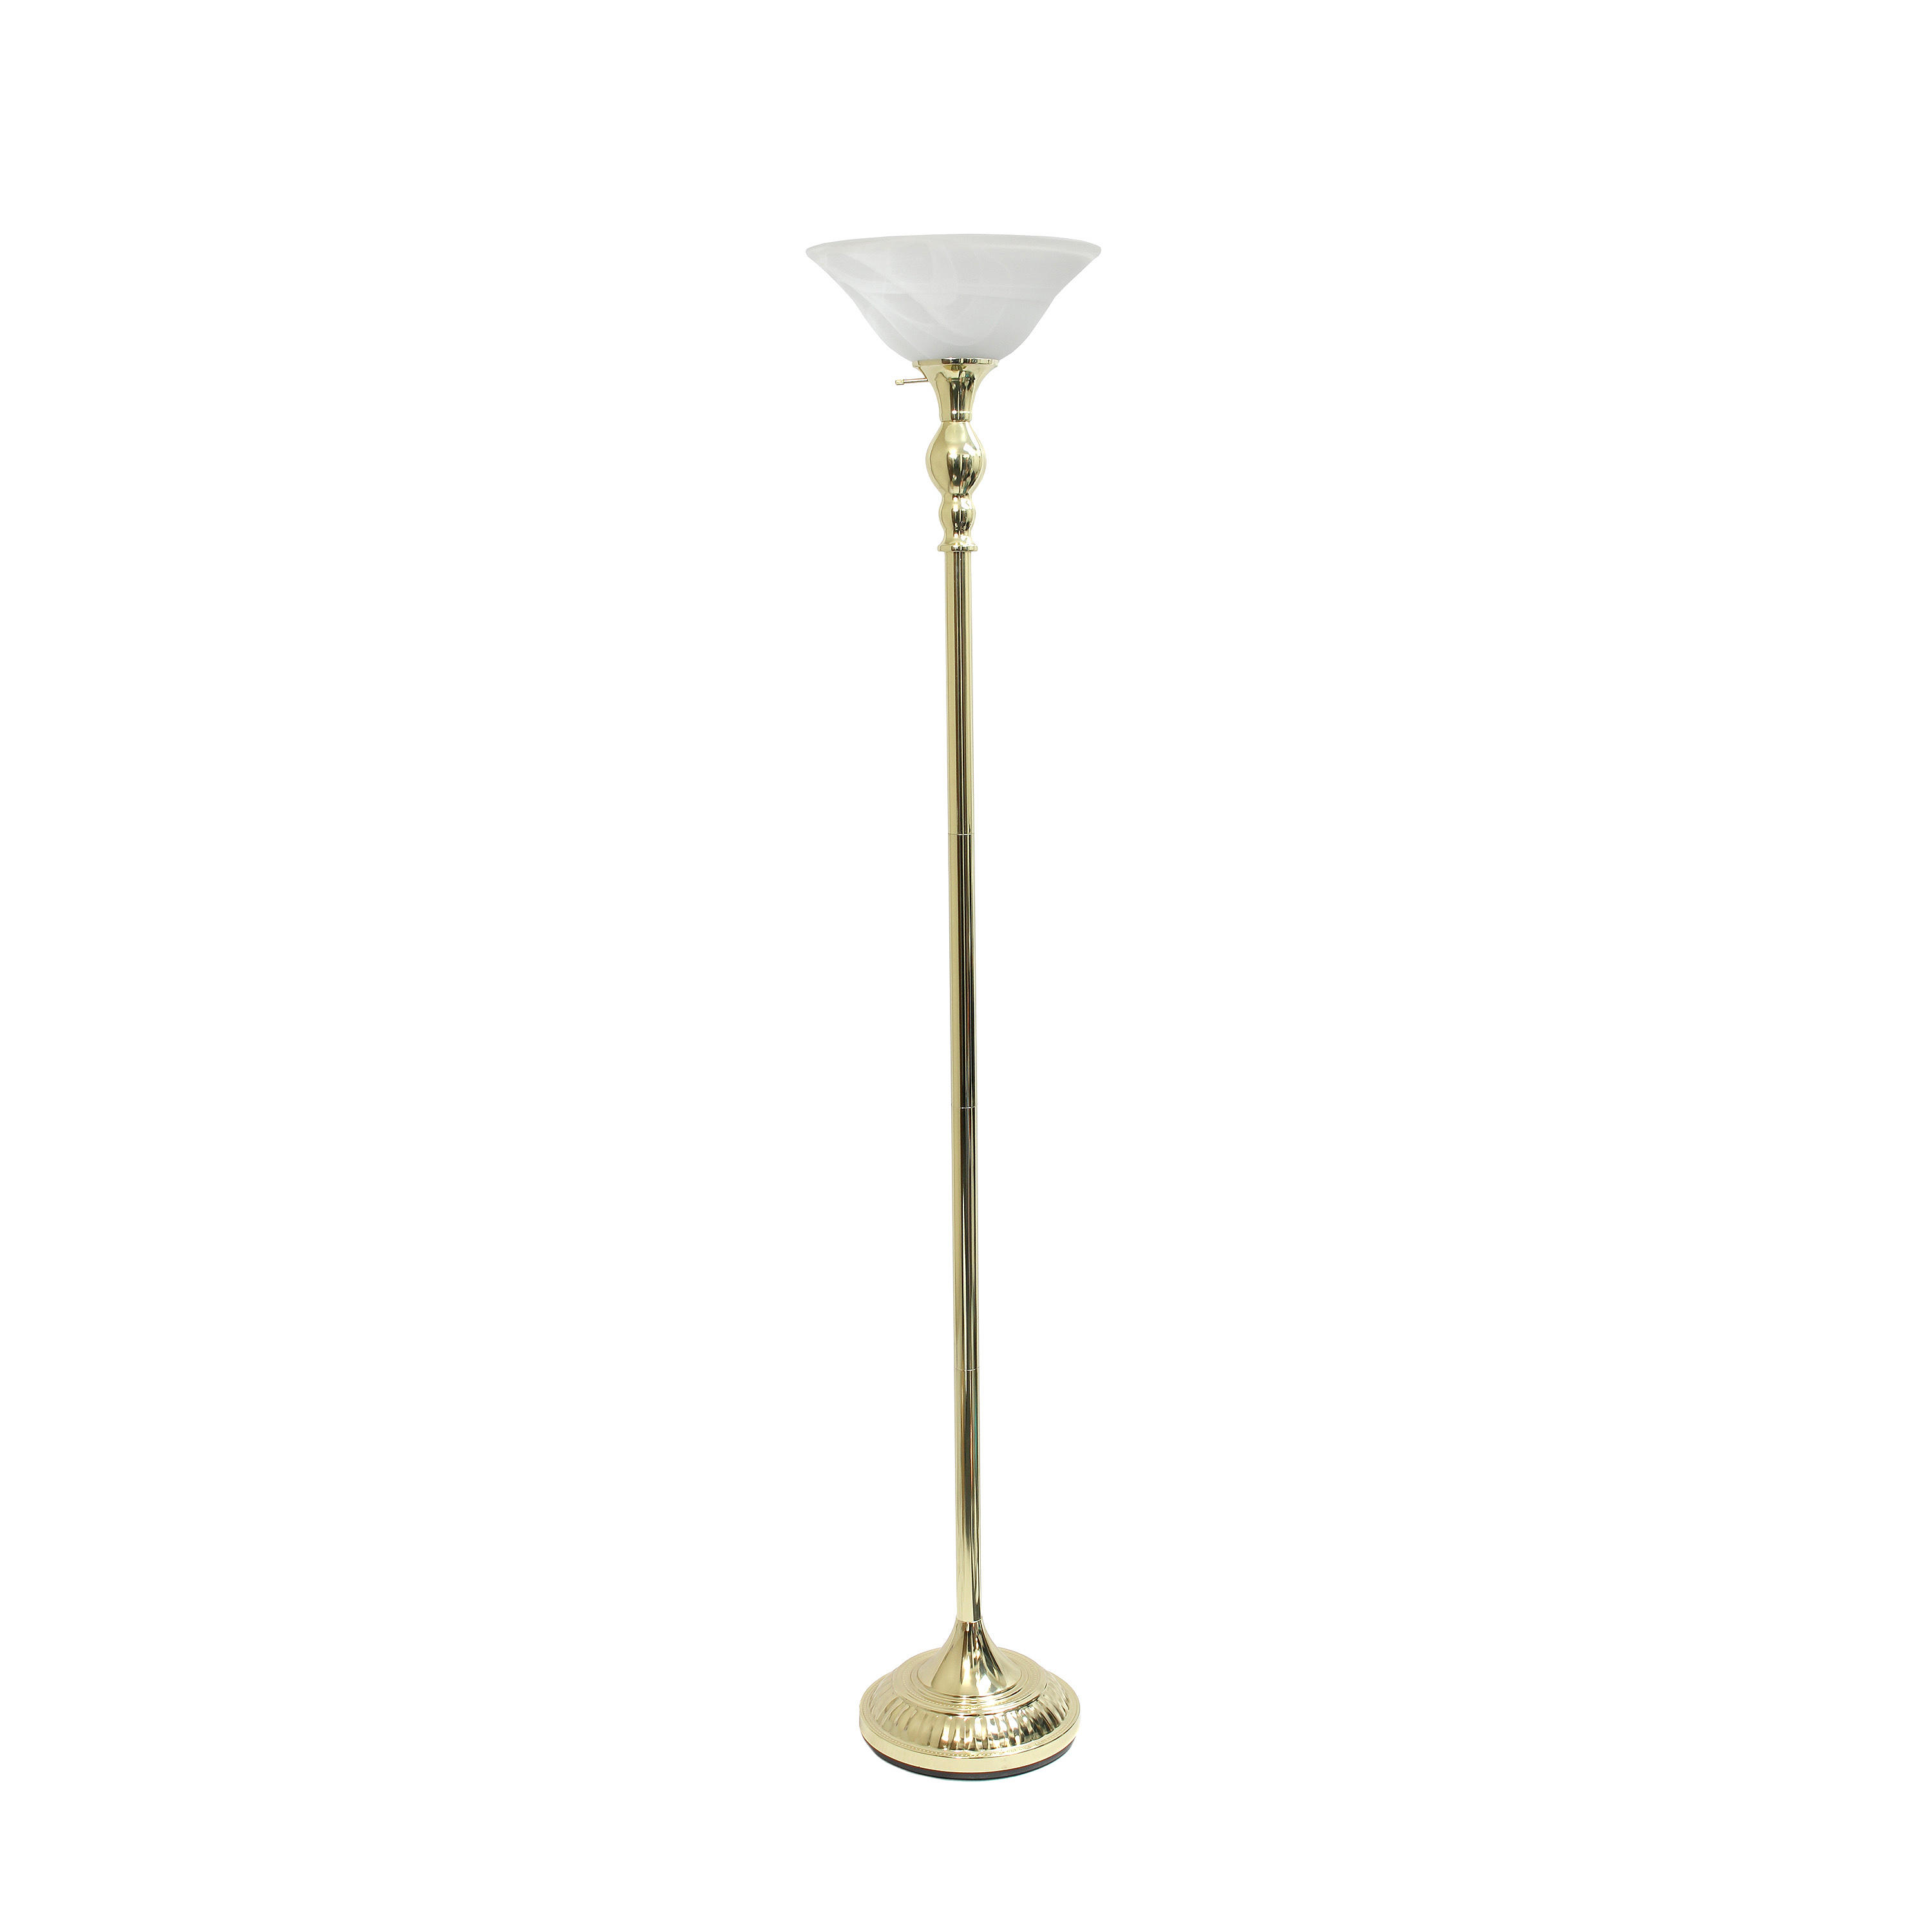 Lalia Home Torchiere Floor Lamp with 2 Reading Lights and Scalloped Glass Shades, Gold